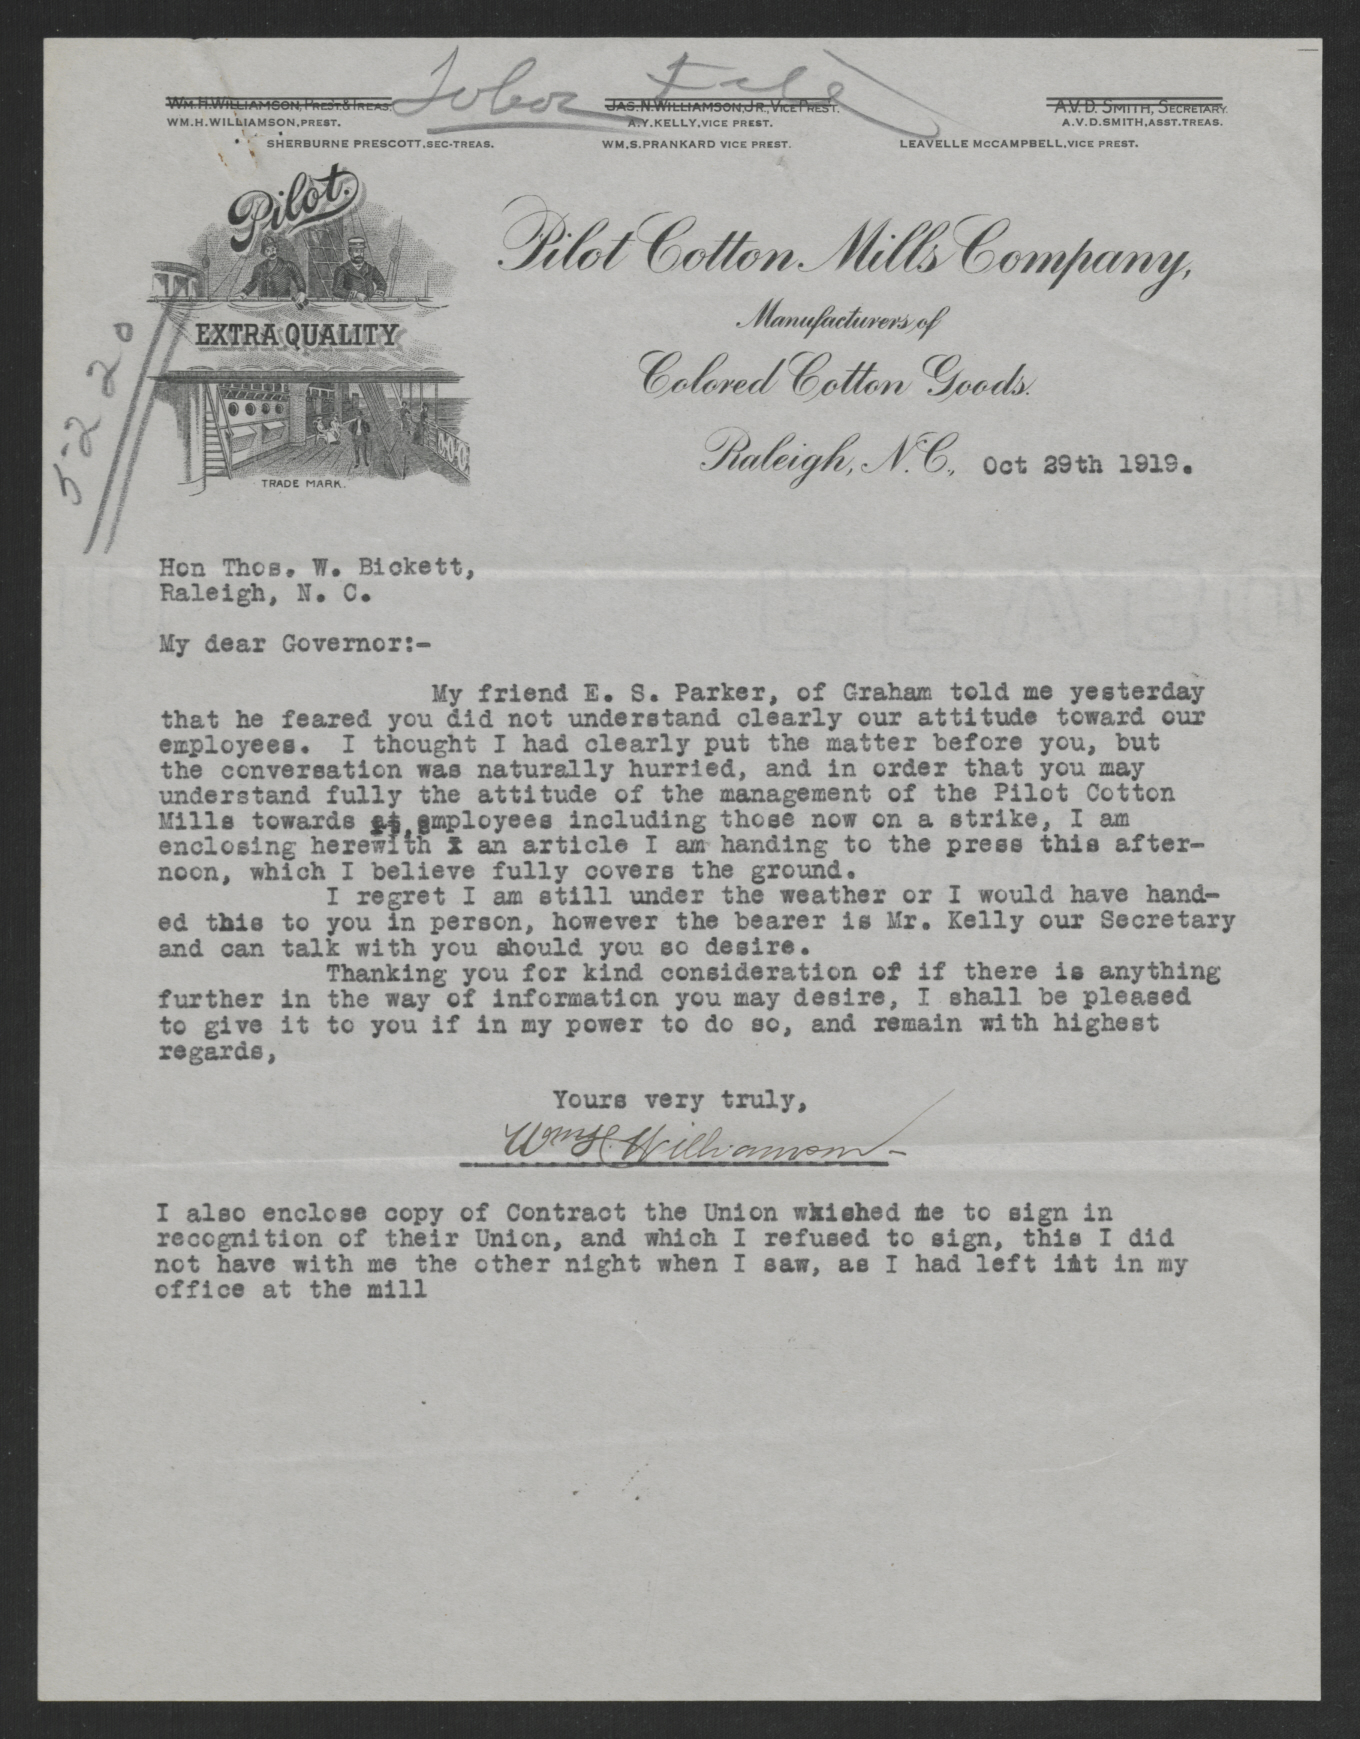 Letter from William H. Williamson to Thomas W. Bickett, October 29, 1919